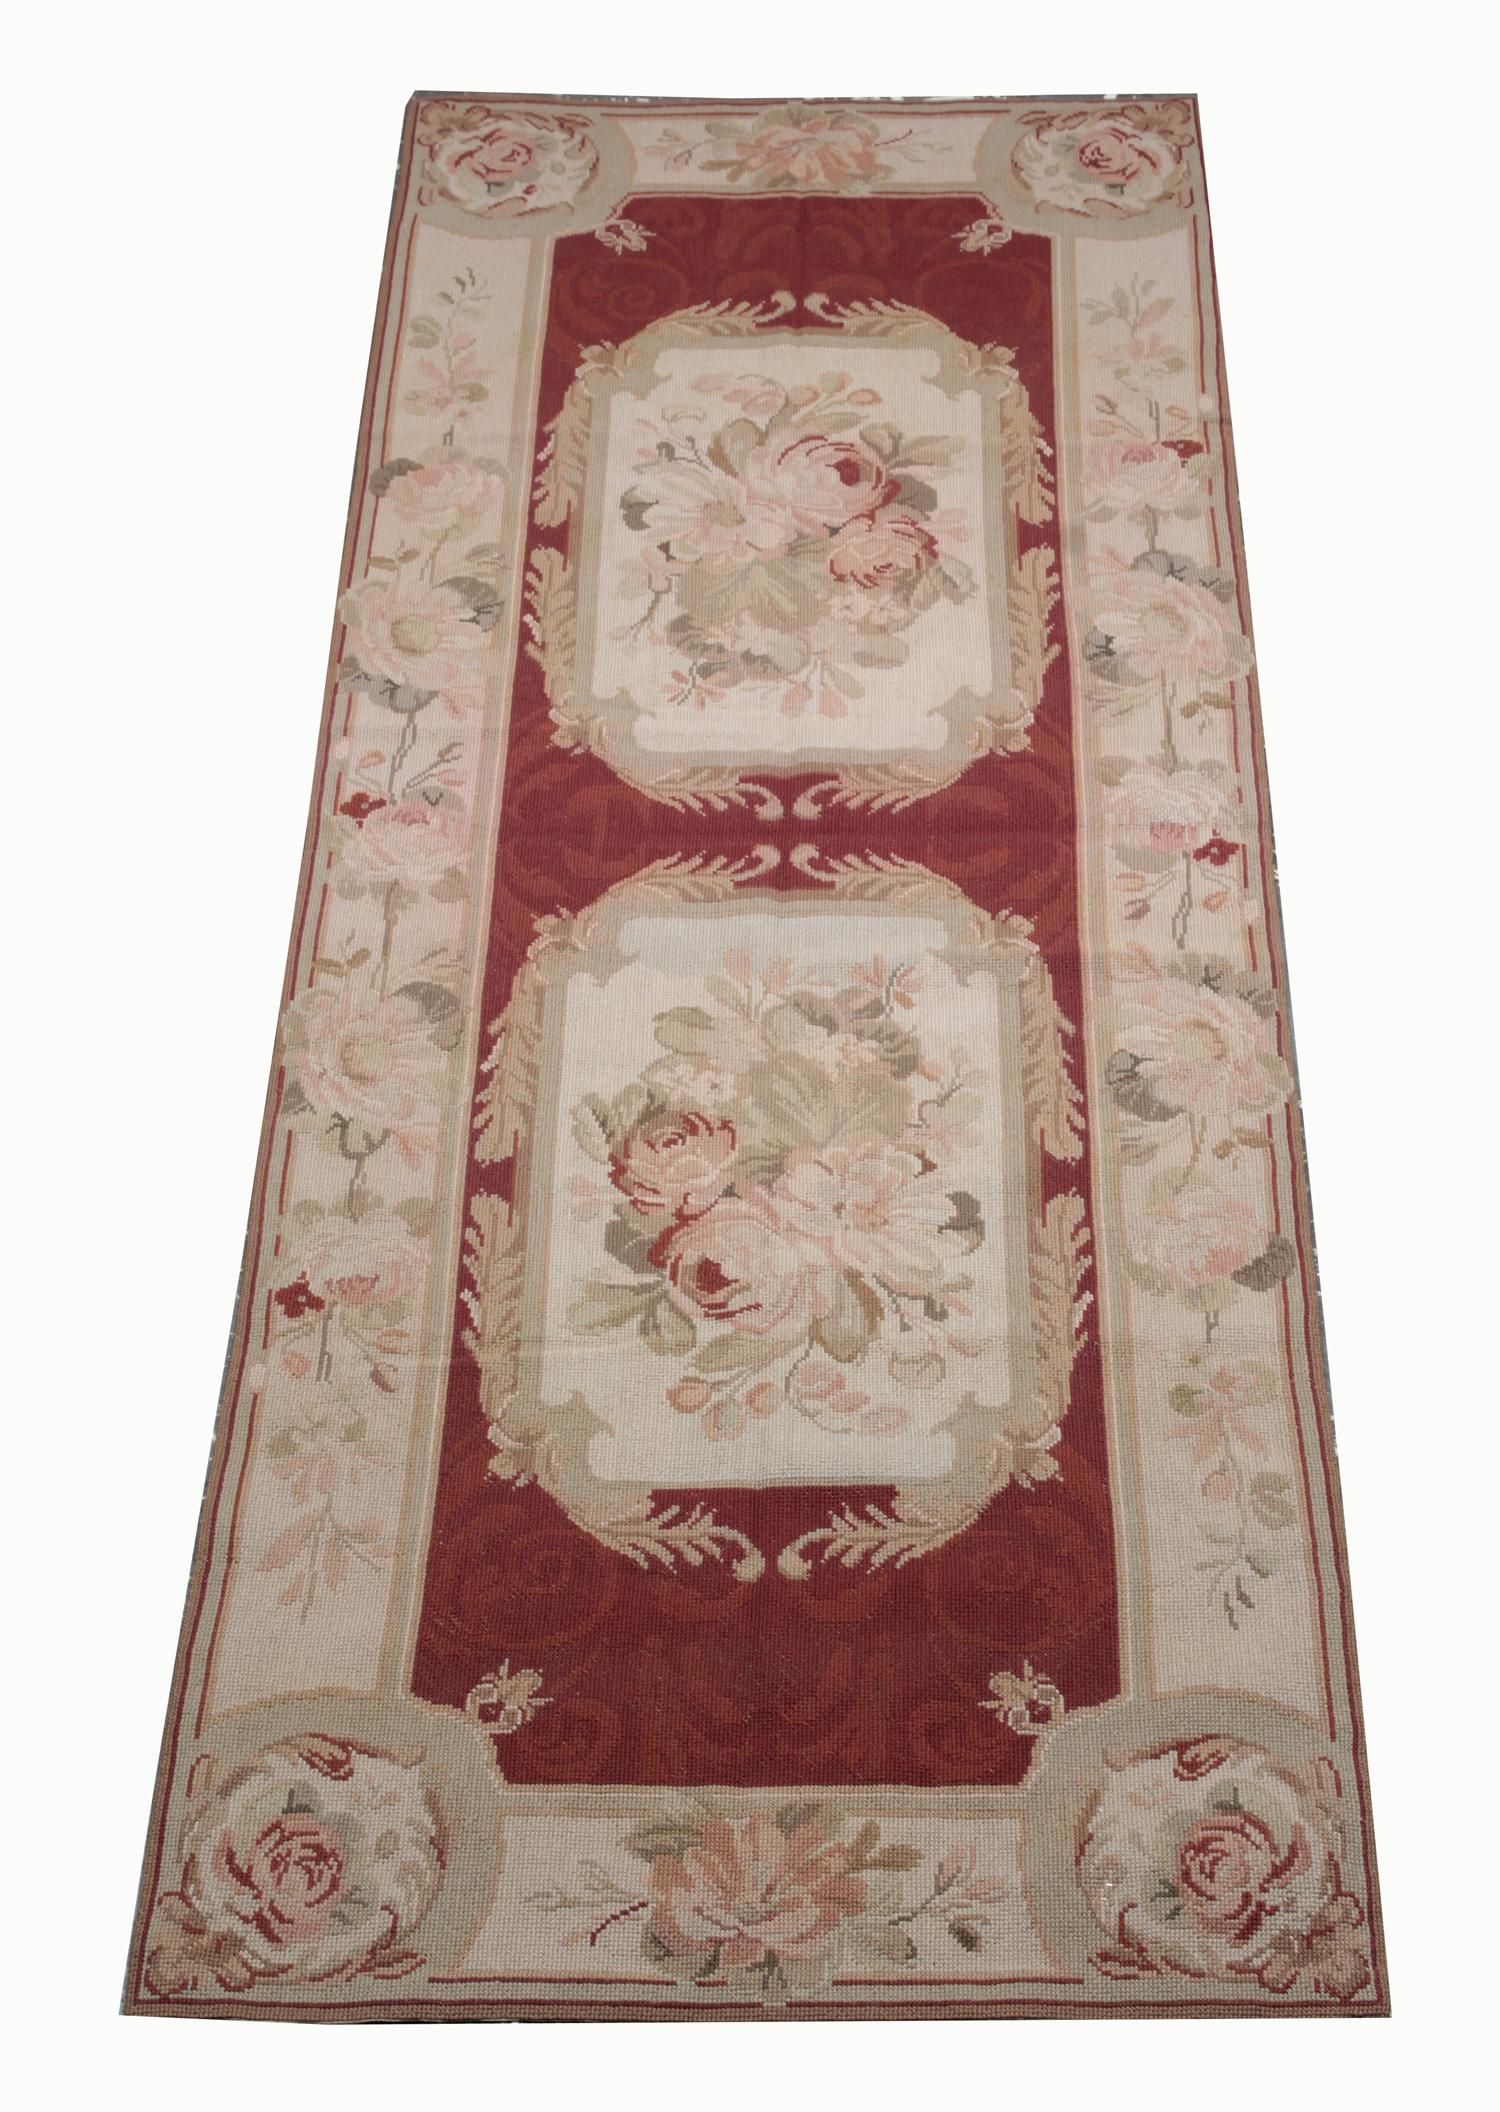 This red rug runner is the very good item as living room rugs and getting most of the attention in rug store by clients because of the color and design. These handmade elegant Chinese Aubusson floor rugs has The soft shade of colors. these luxury